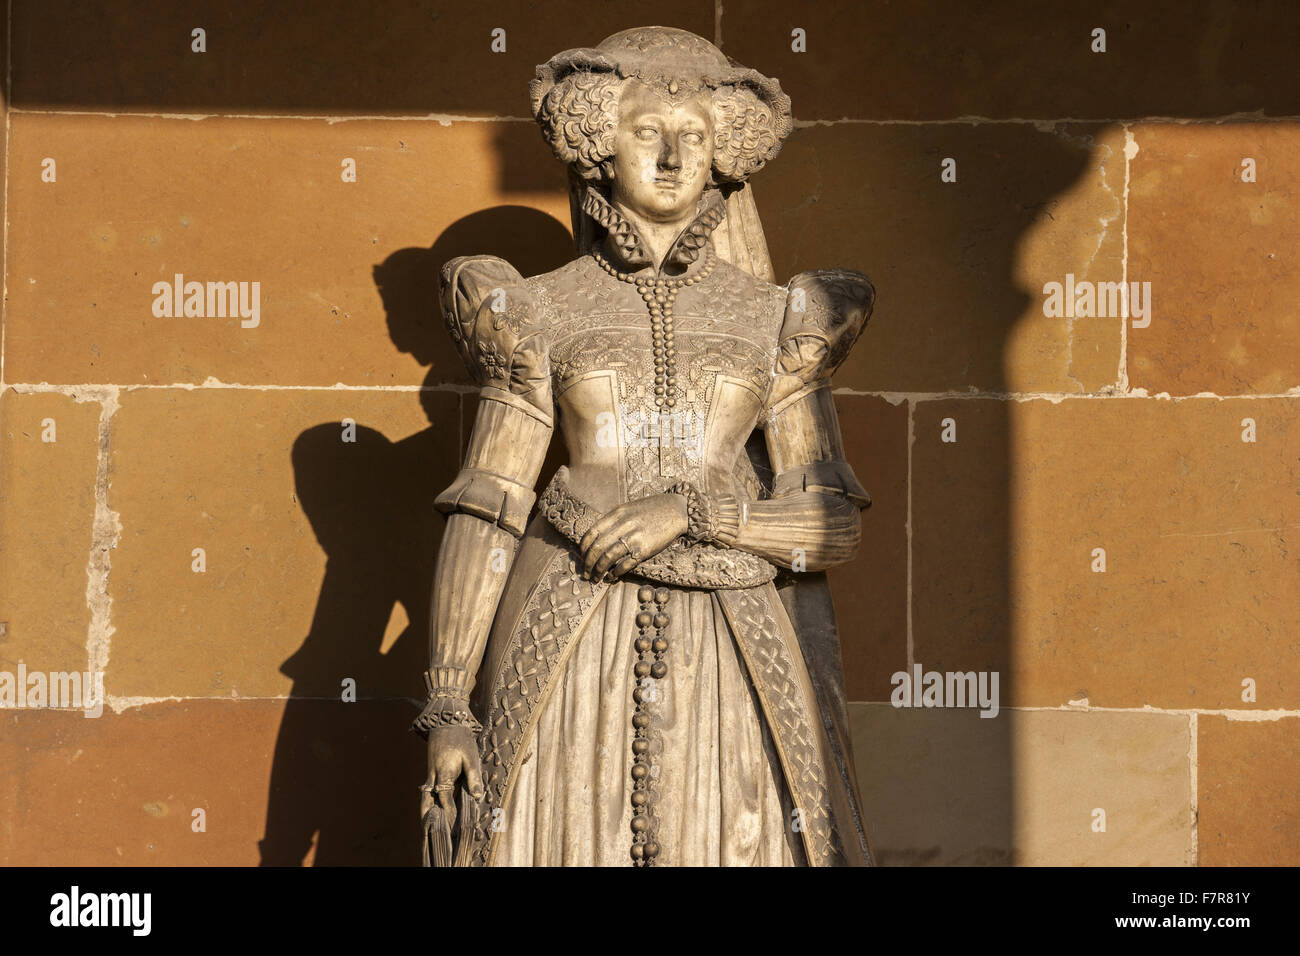 Statue of Mary, Queen of Scots in the grounds at Hardwick Hall, Derbyshire. The Hardwick Estate is made up of stunning houses and beautiful landscapes. Stock Photo